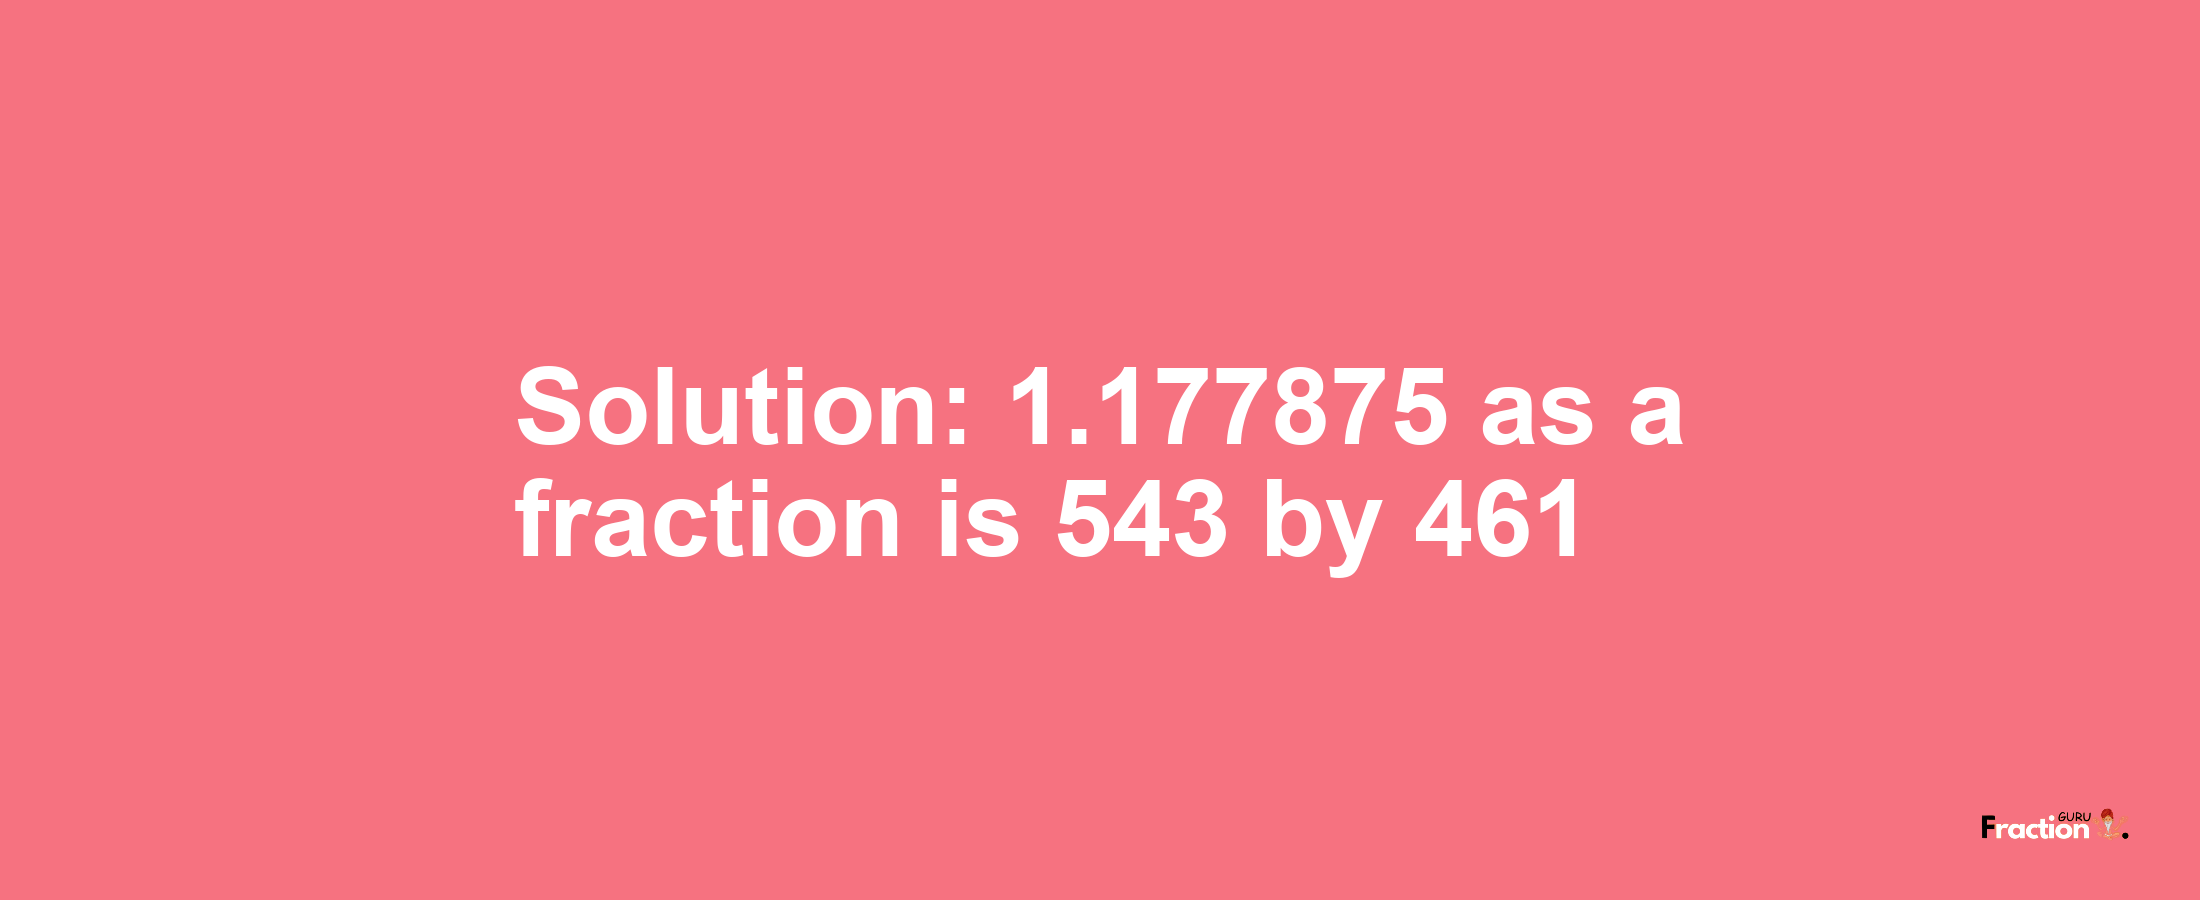 Solution:1.177875 as a fraction is 543/461